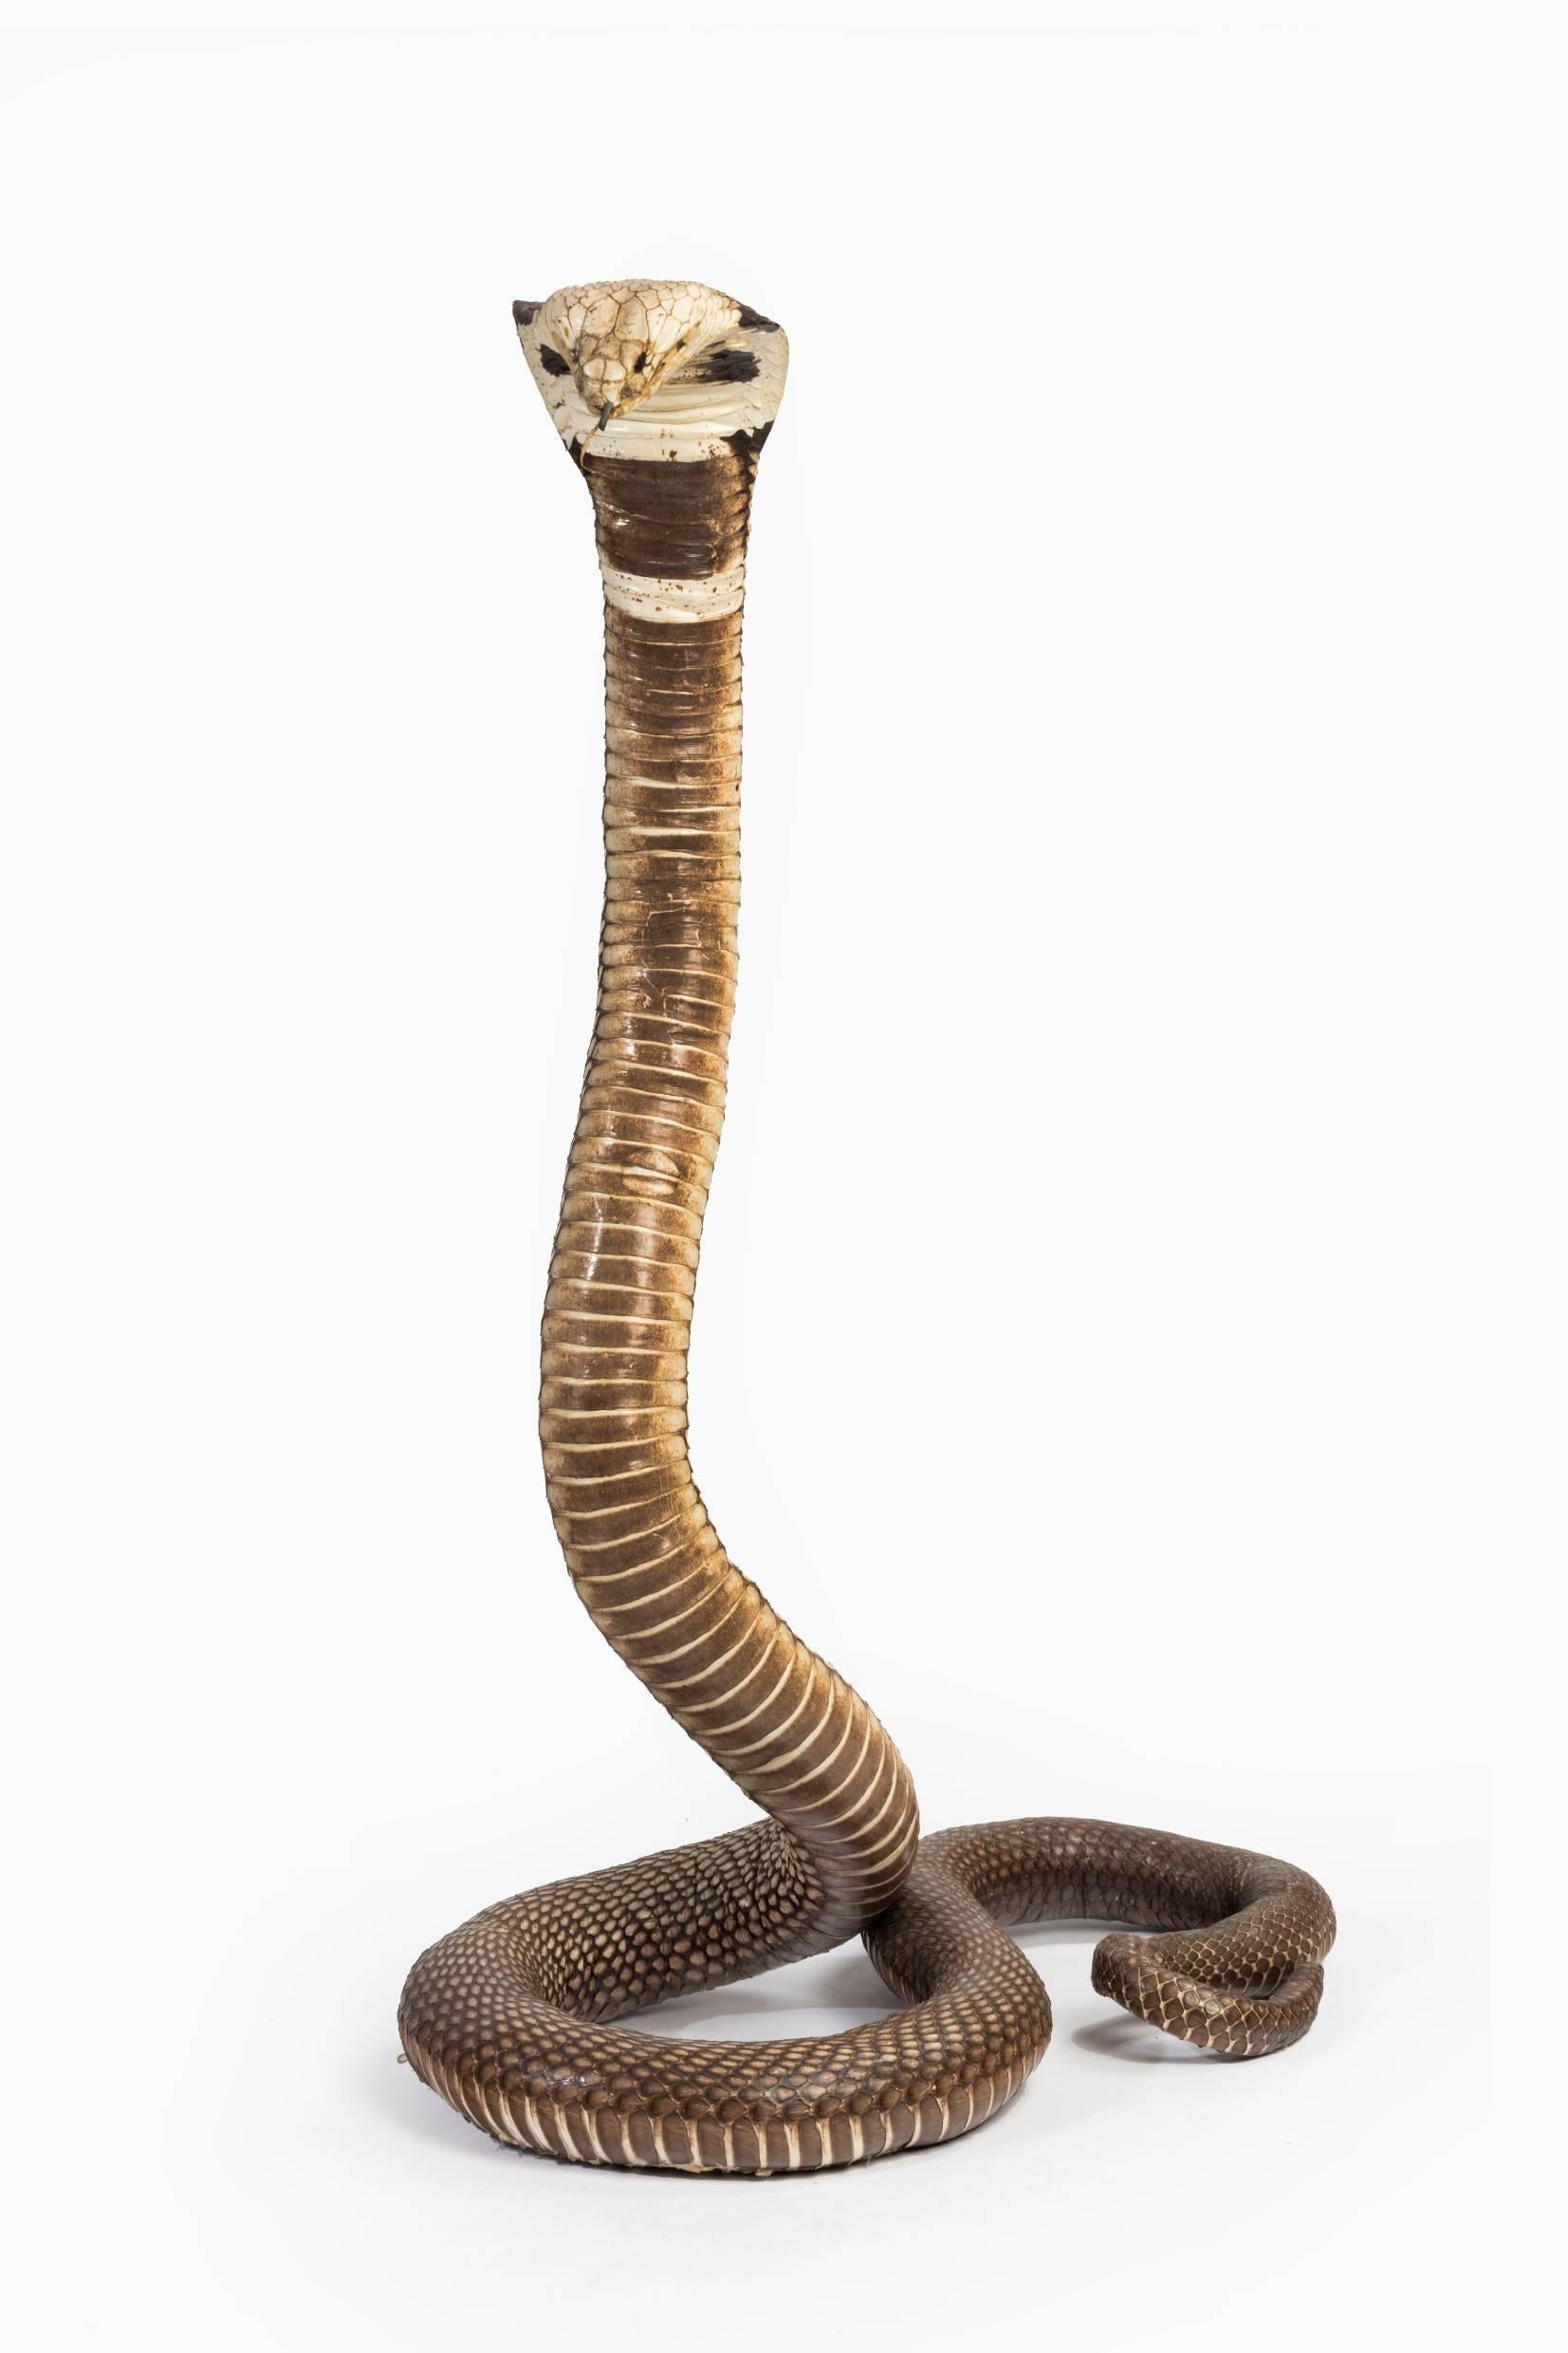 A very well posed and mounted Monocled Cobra (Naja Kaouthia) in excellent condition dating to the late Victorian-early 20th Century period.
With hood open and in a threatening display this taxidermy Cobra looks ready to strike and is one of the